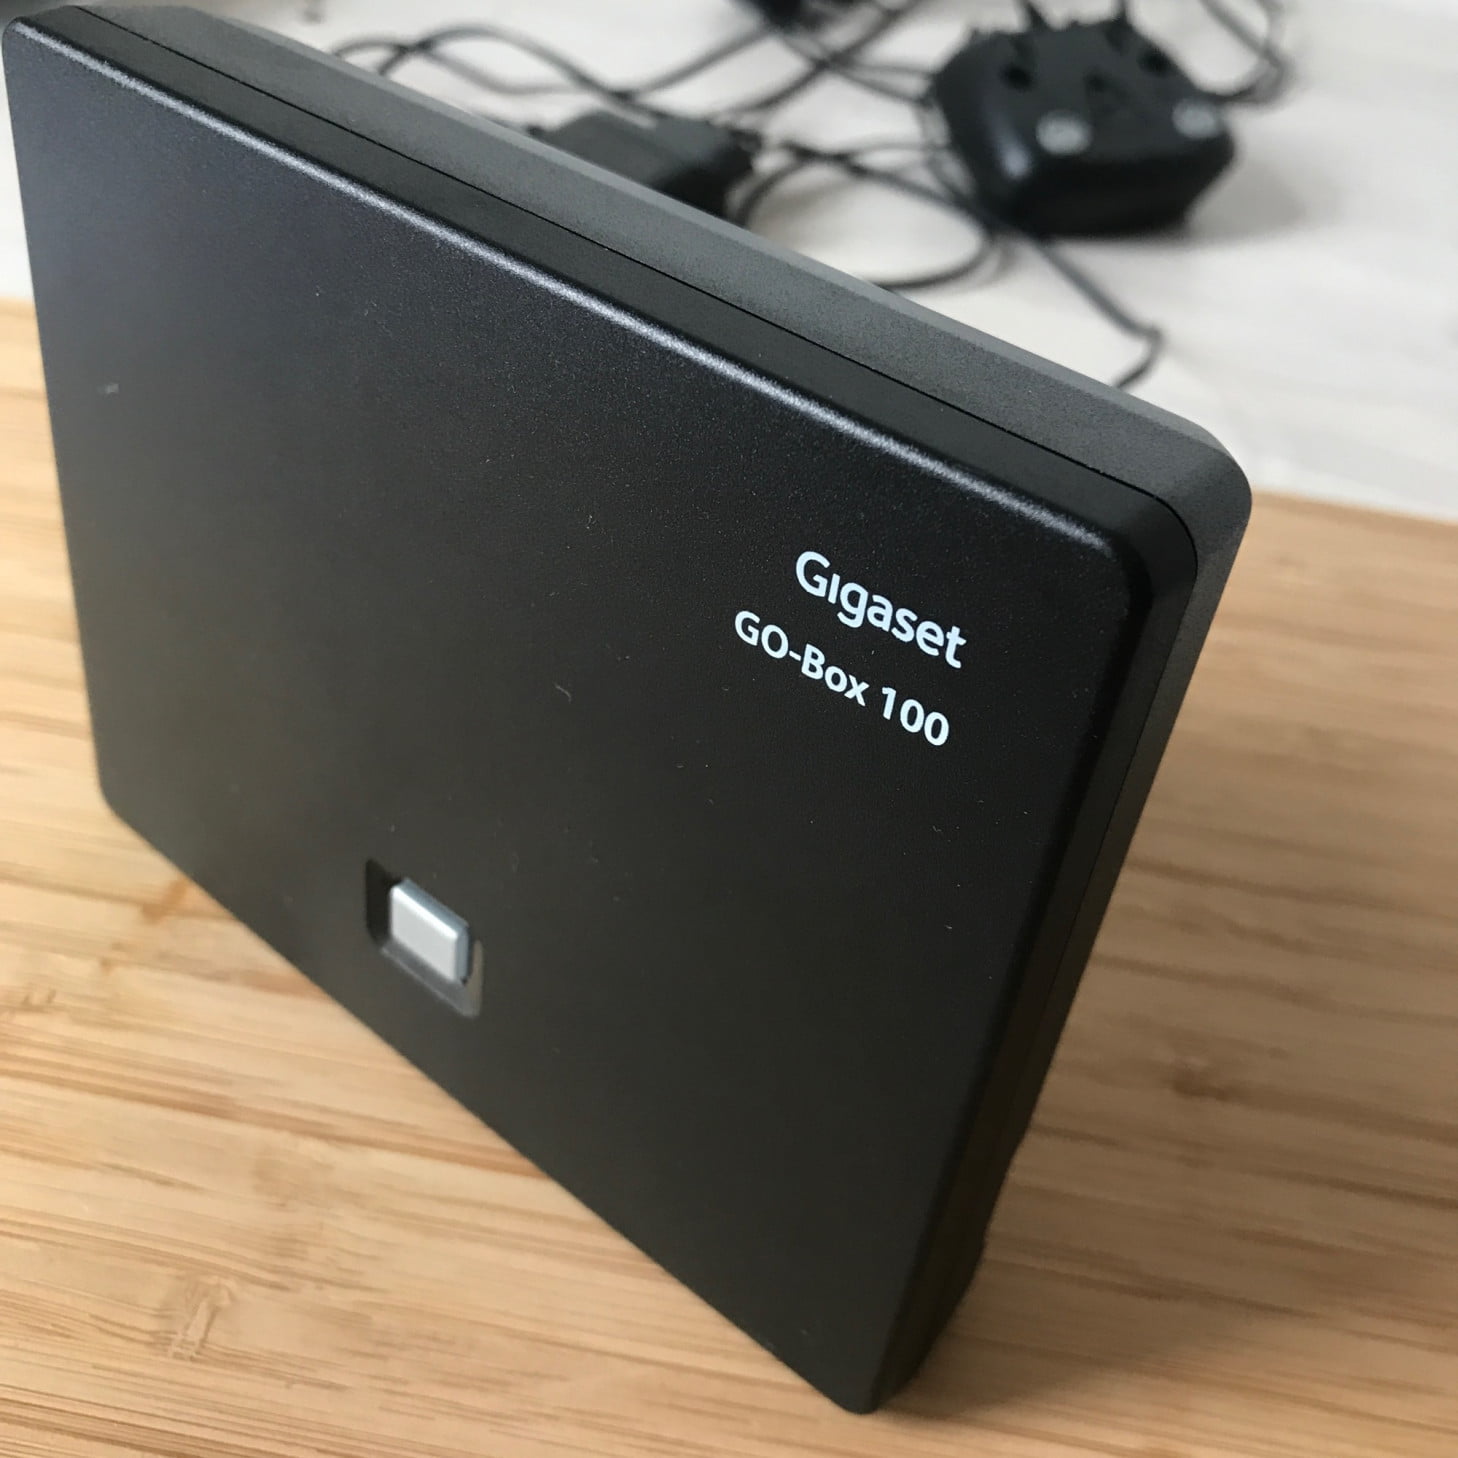 Review: Gigaset Go Box 100 Voip DECT Telephony tested ⌚️ 🖥 📱 mac&egg